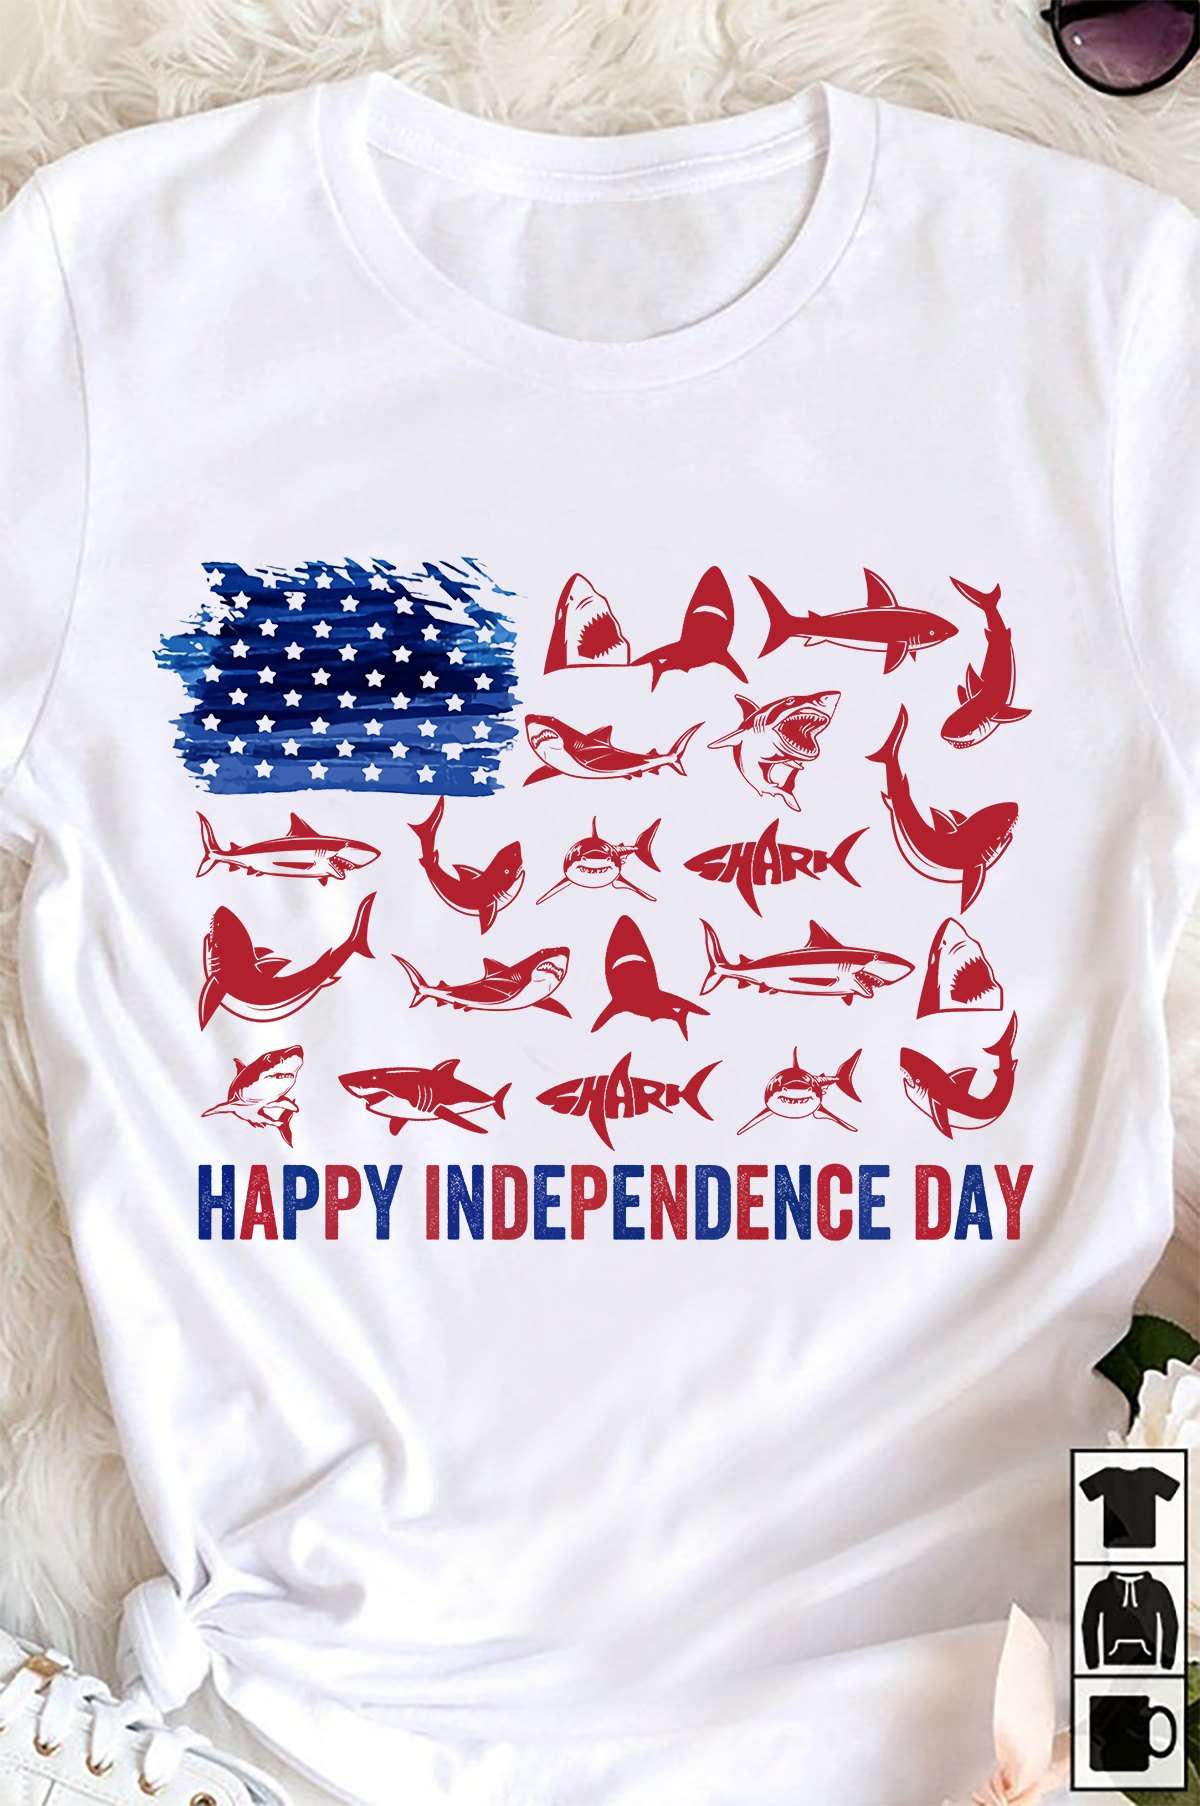 America Shark, Shark Awareness Day July 14 - Happy independence day